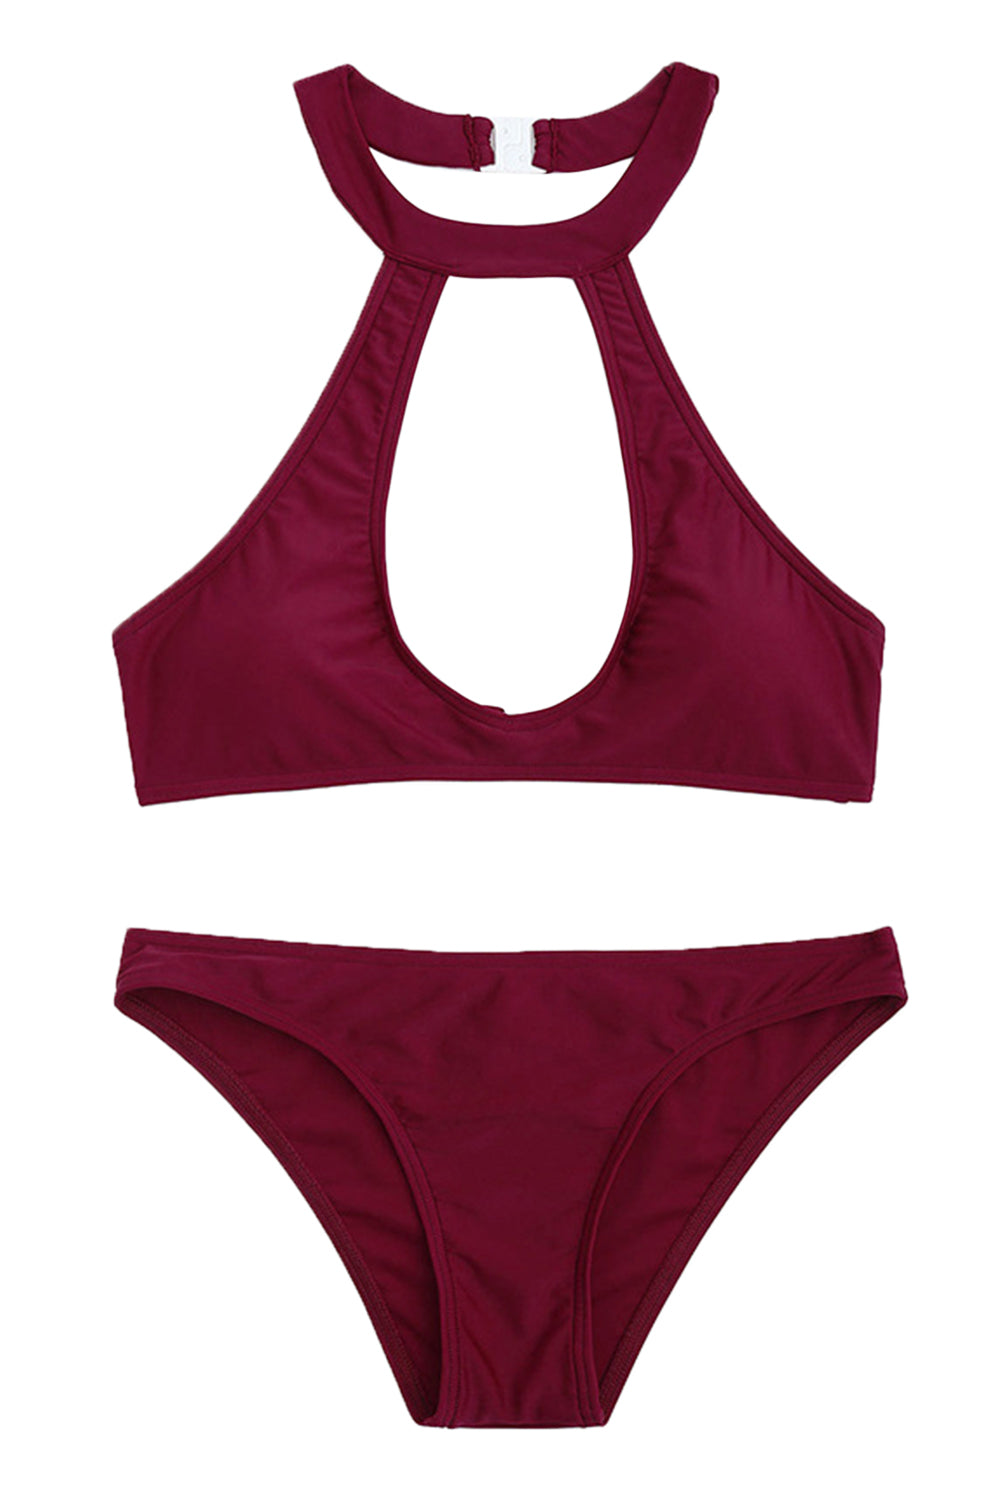 Iyasson Sexy Solid-color Hollow out Bikini Sets